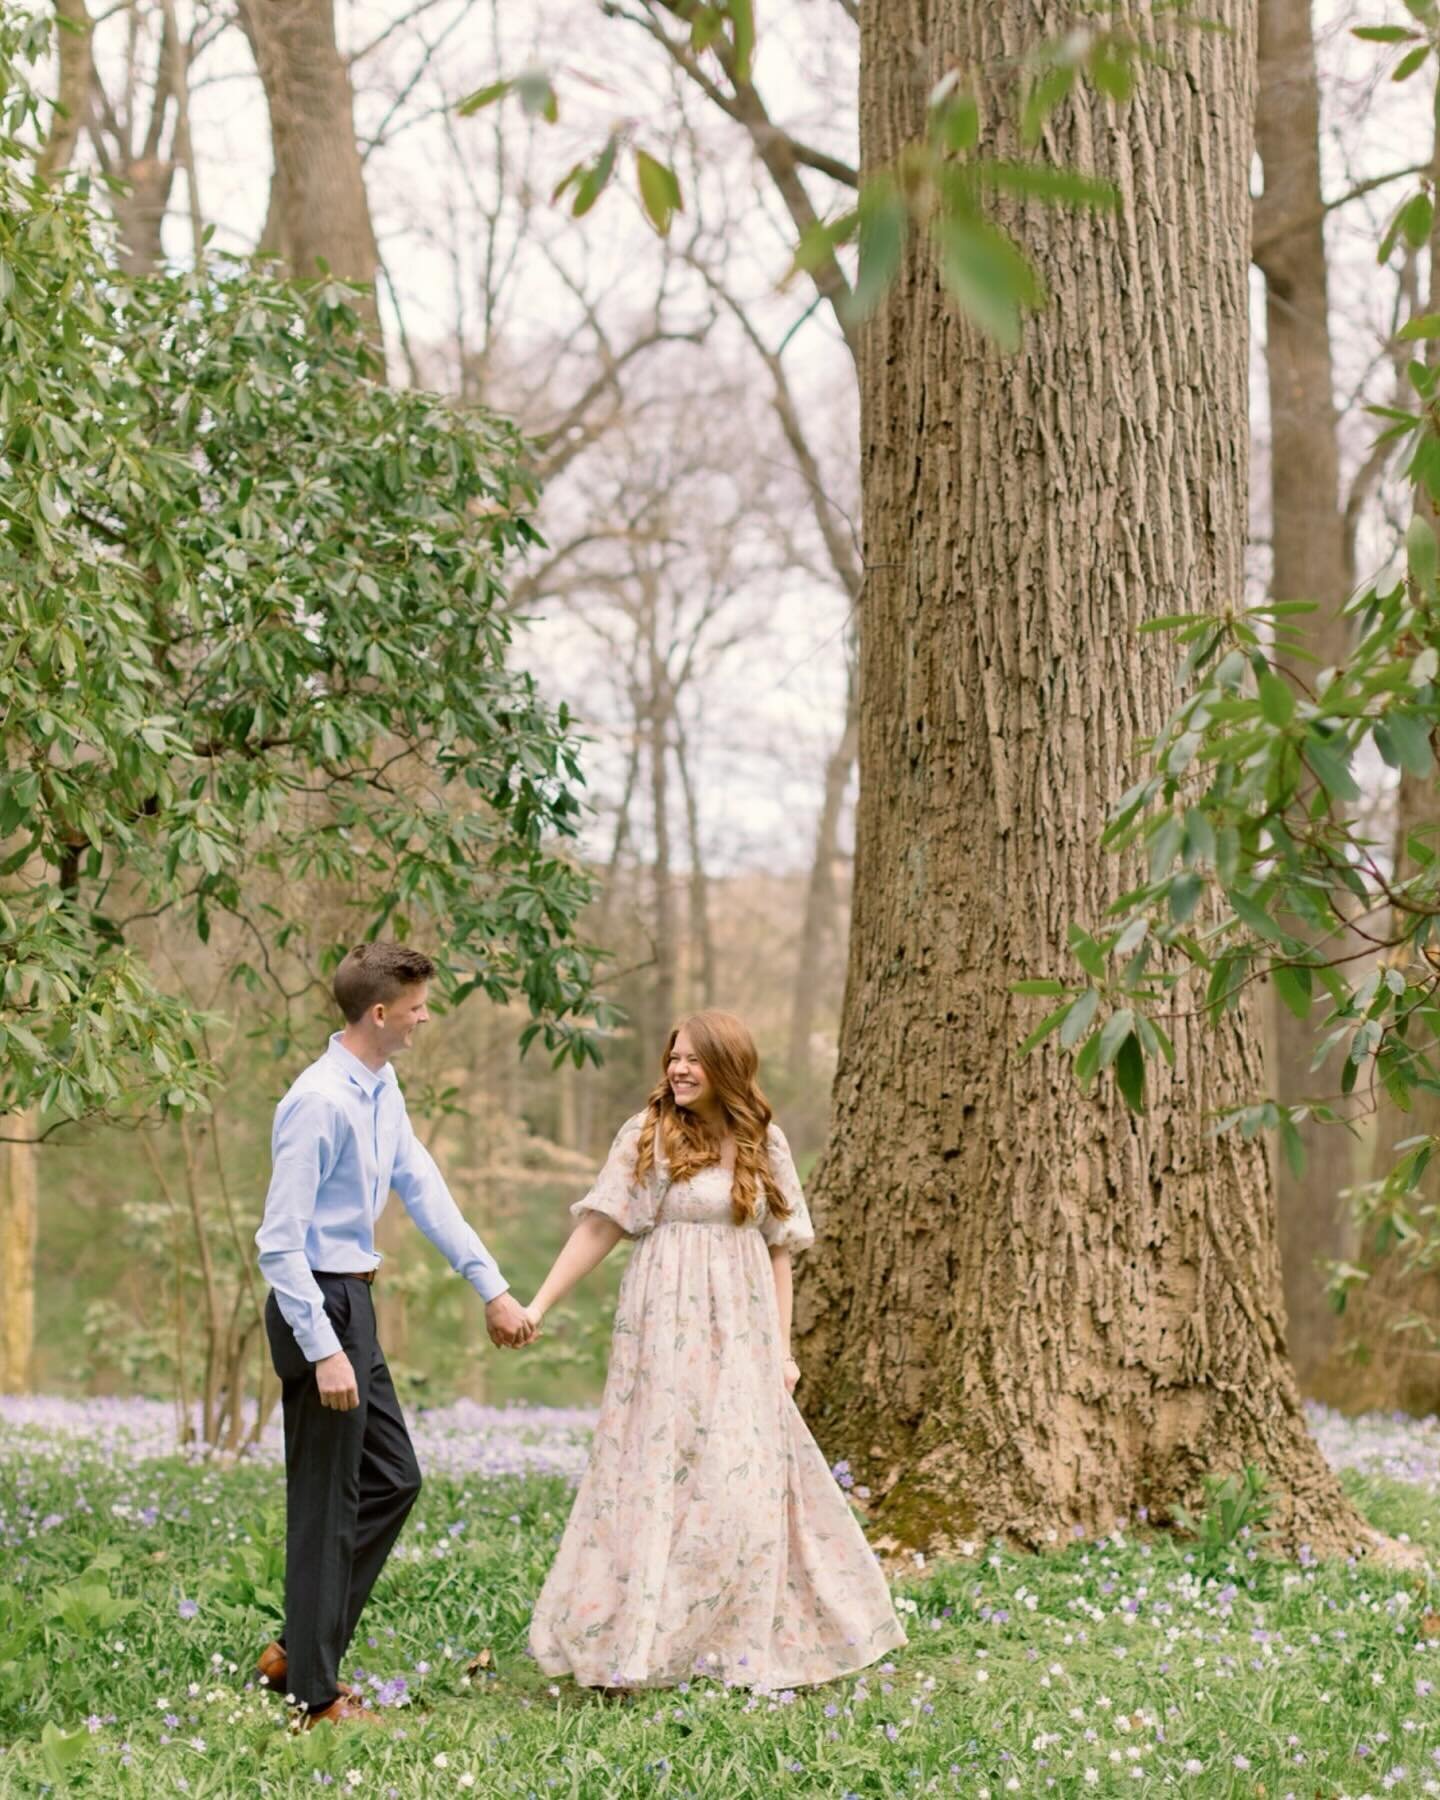 Yesterday was a Winterthur fairytale with the spring blooms showing off for Emma and Jacob&rsquo;s engagement photos! ✨

Between the rolling hills, endless gardens Winterthur is one of the most fairy like places you can find yourself. Emma&rsquo;s gl